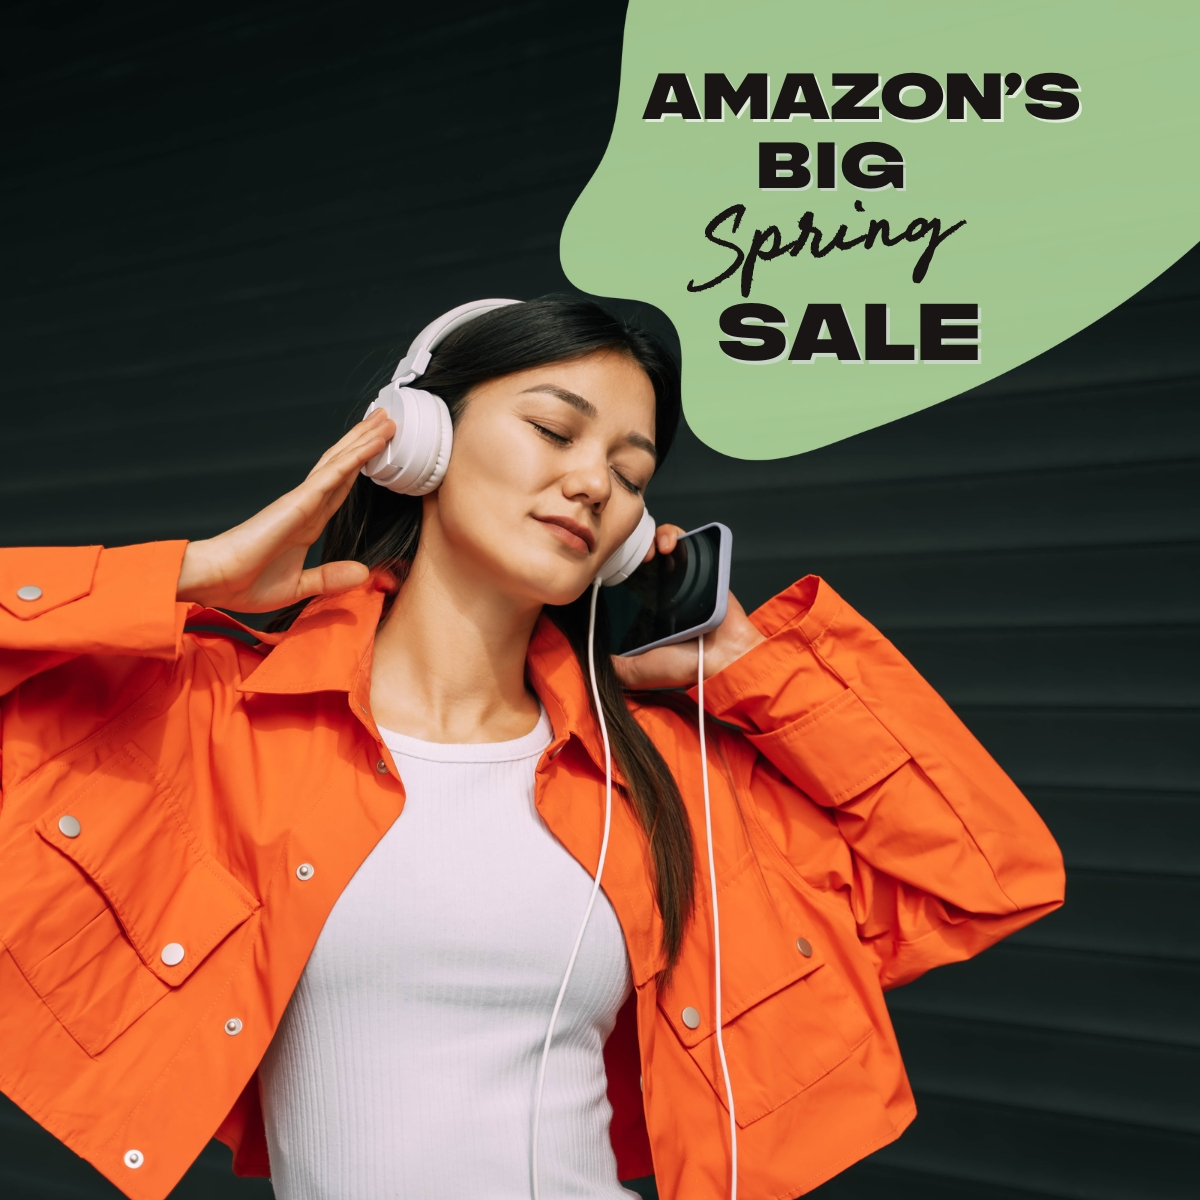 Do not Miss Out on the Greatest Headphone Offers at Amazon's Large Spring Sale